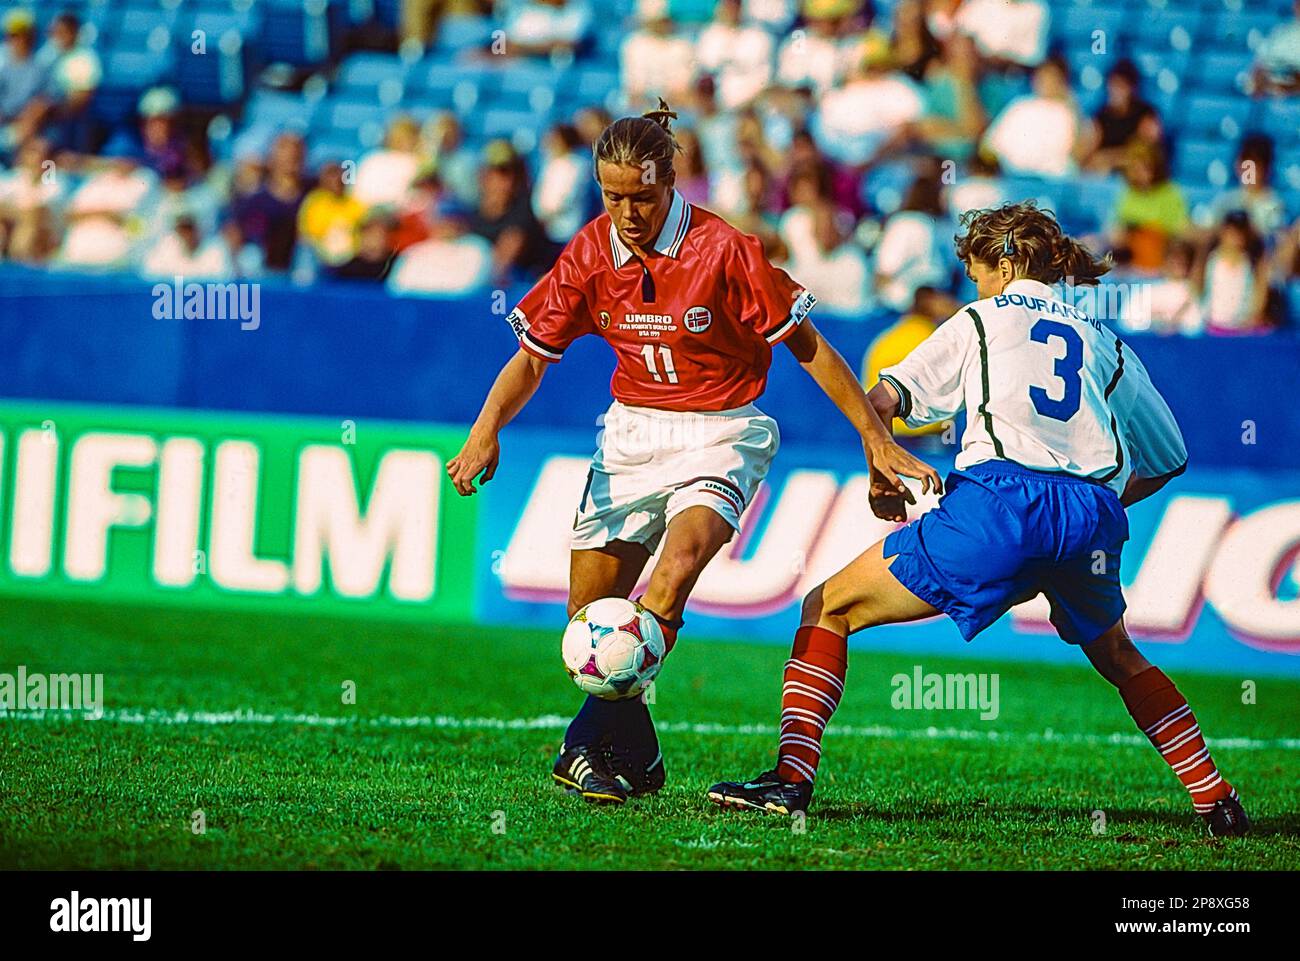 Marianne Pettersen (NOR) during NOR vs RUS at the 1999 FIFA Women's World Cup Soccer. Stock Photo